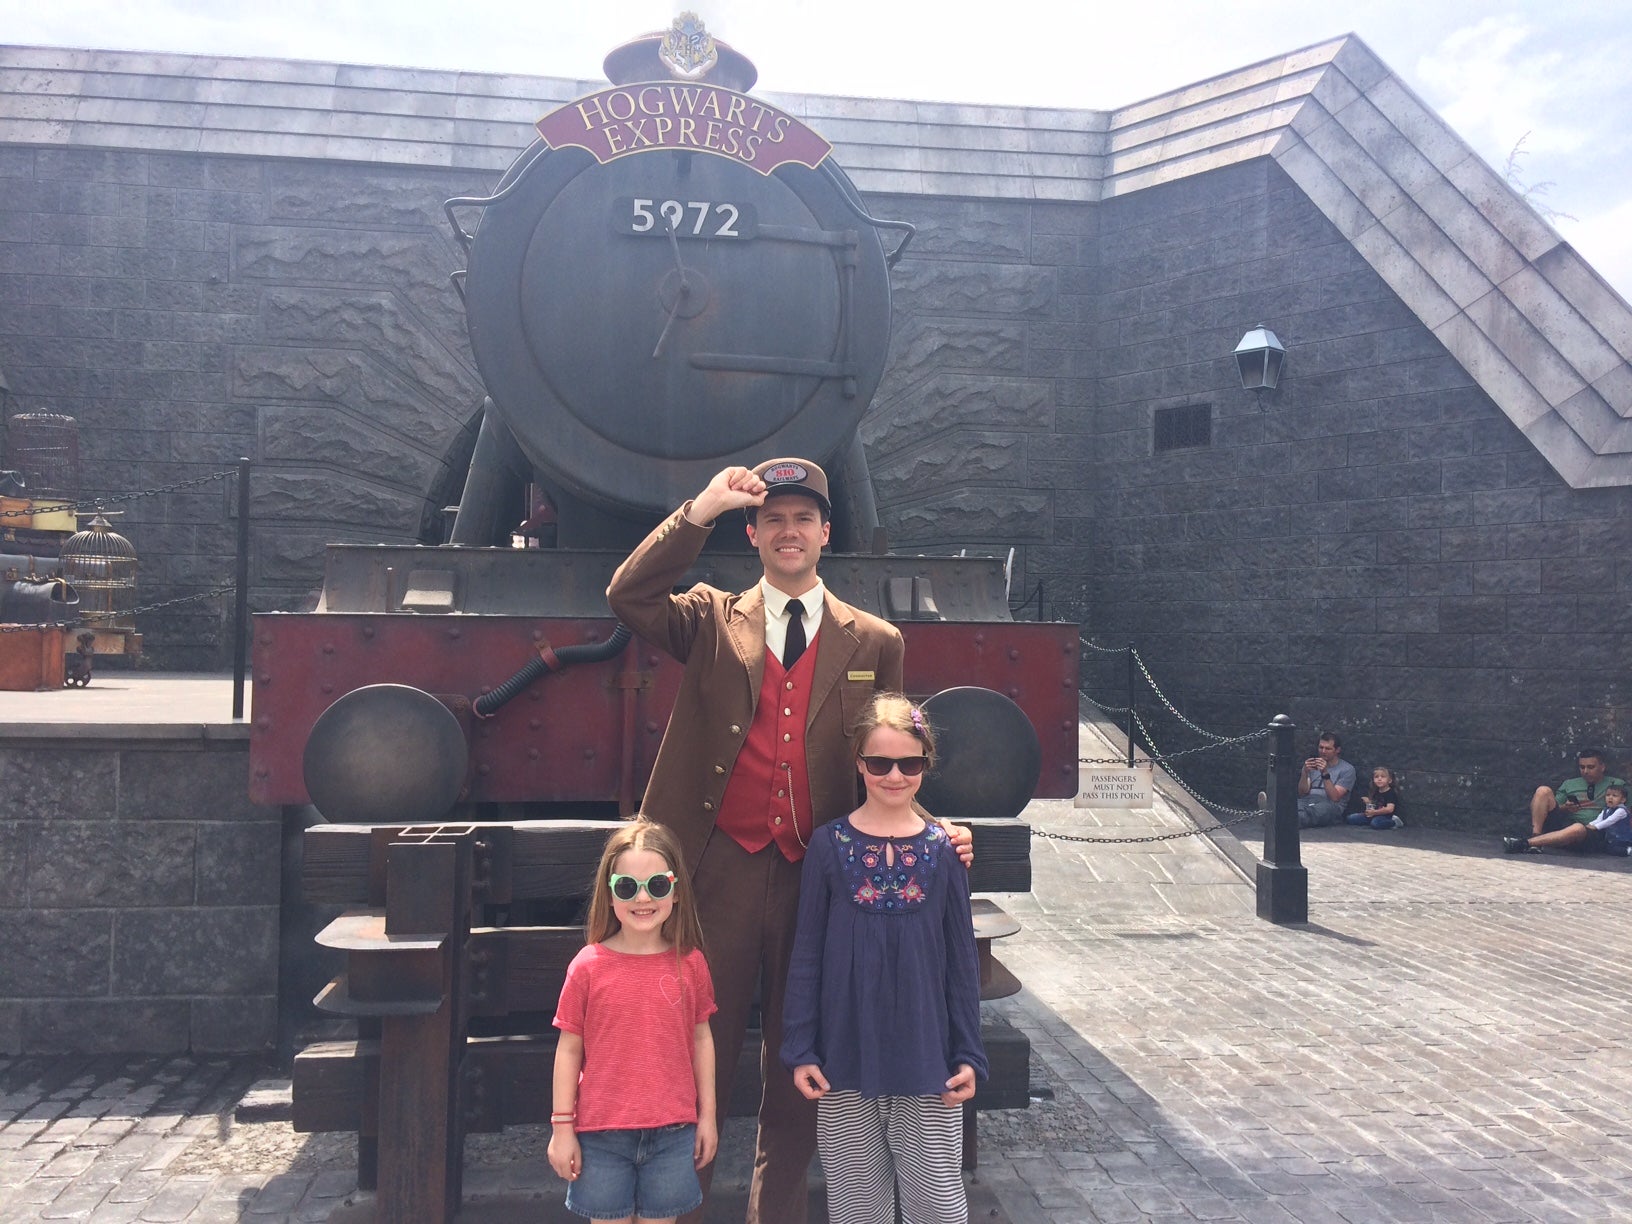 All aboard the Hogwarts Express